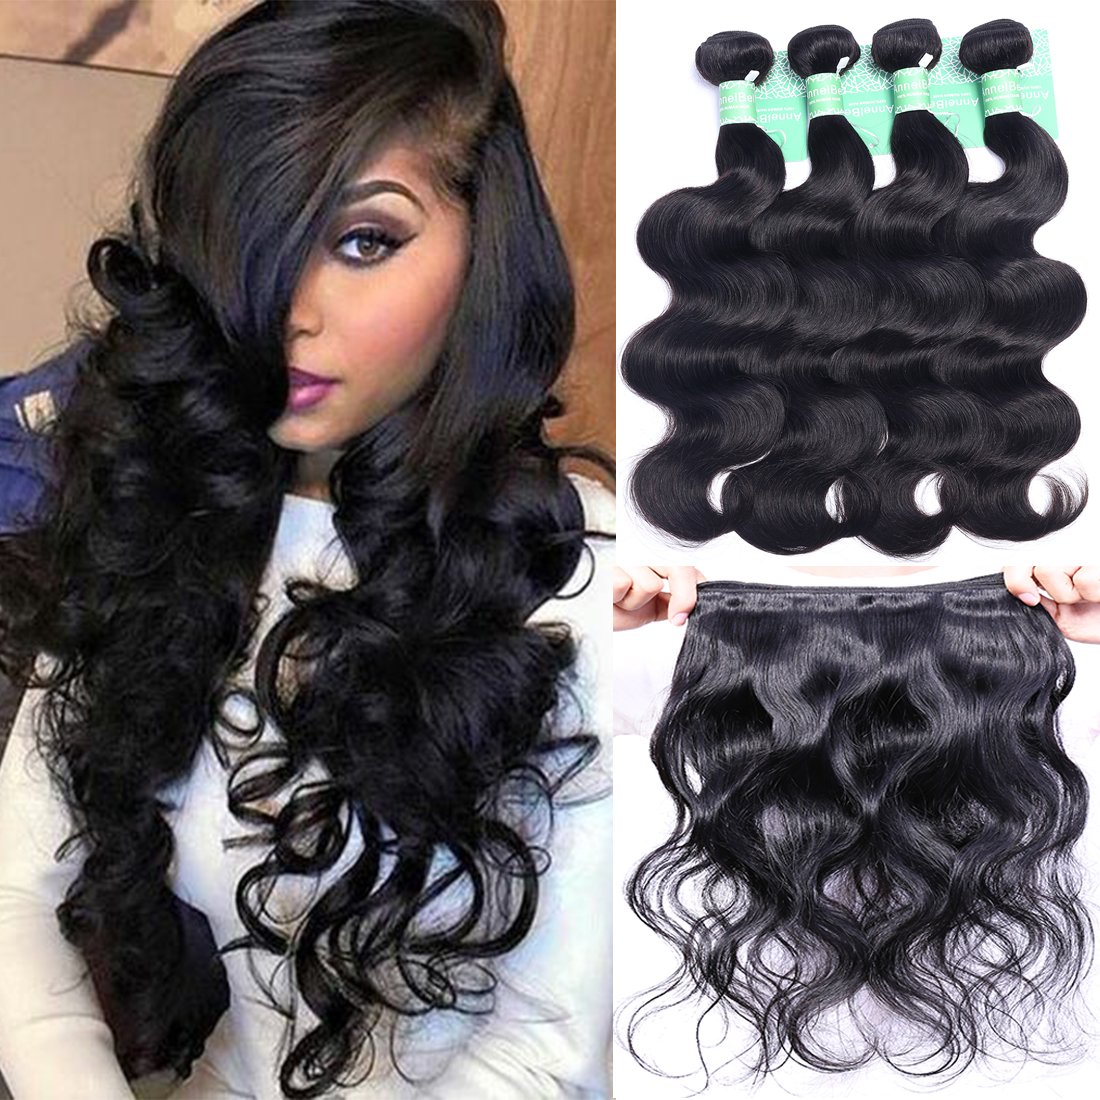  Hair Black Bundles Wavy Wig Color Brazilian Weave Bundles Hair  Hair Natural 360 Wig with (AU, One Size) : Beauty & Personal Care